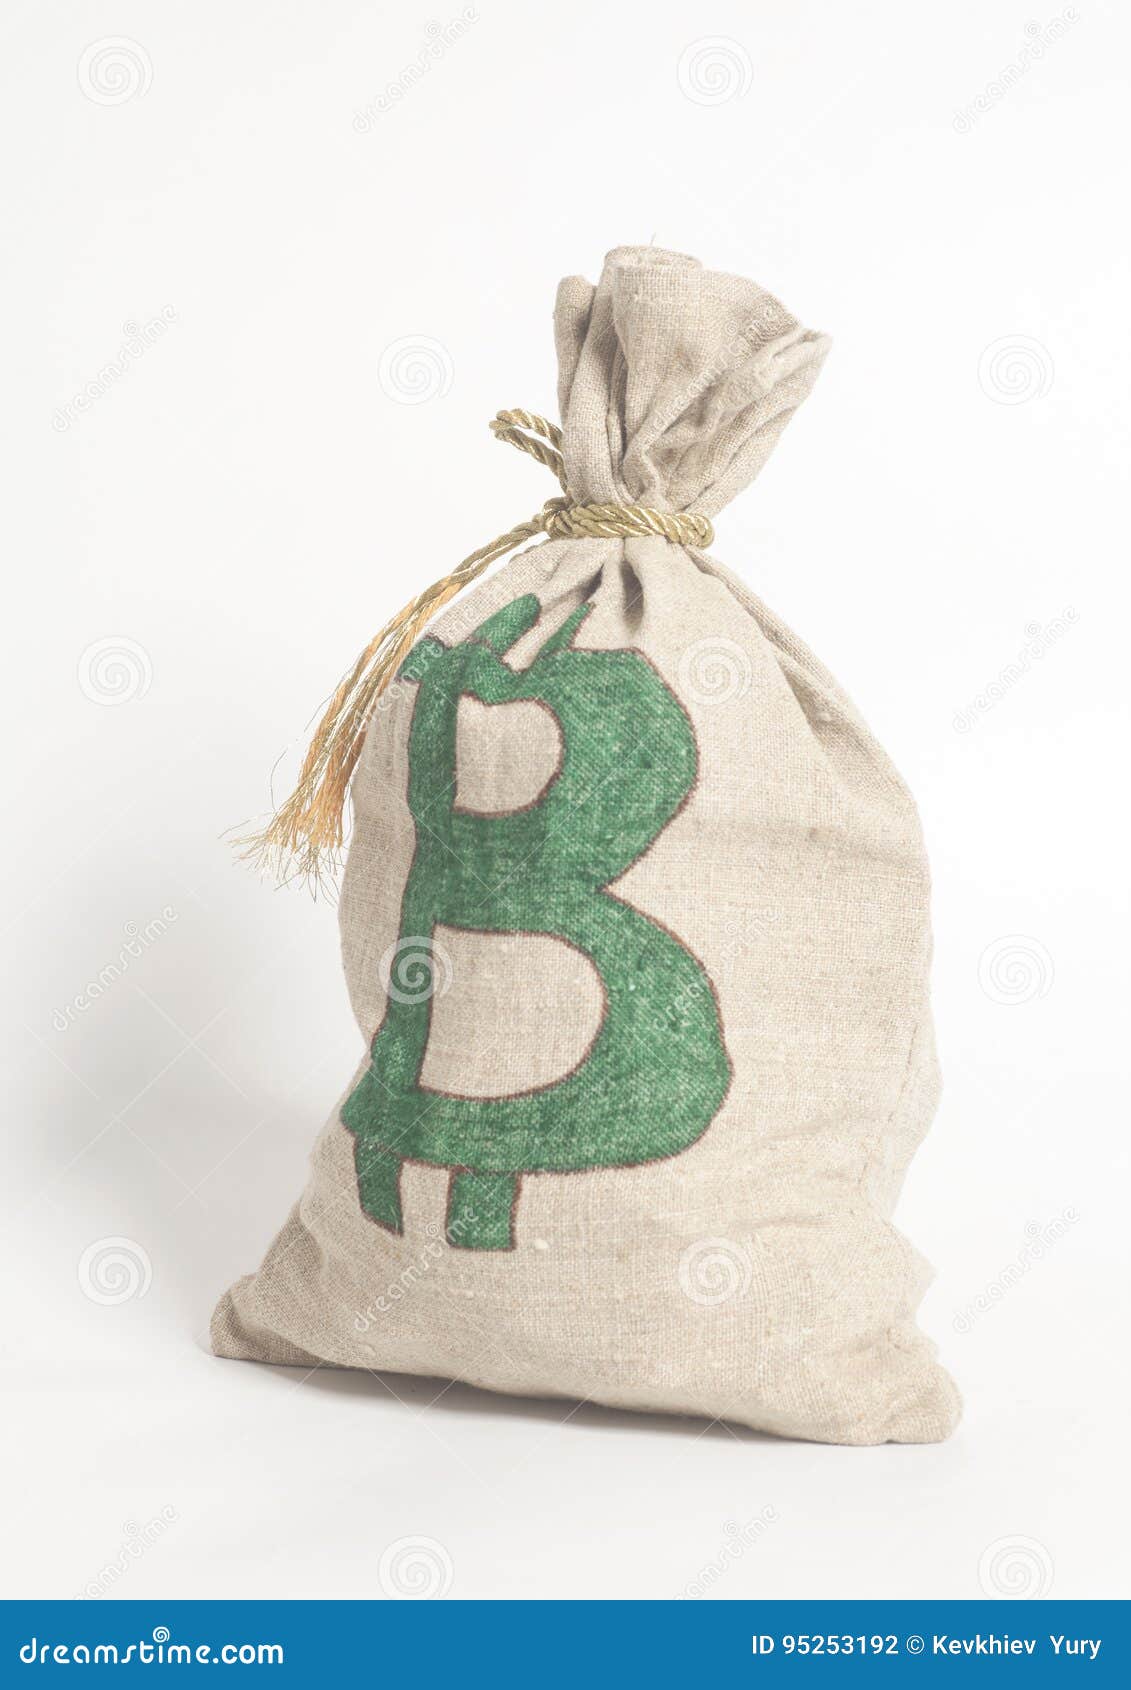 Bitcoin in the bag stock vector. Illustration of income - 109655510